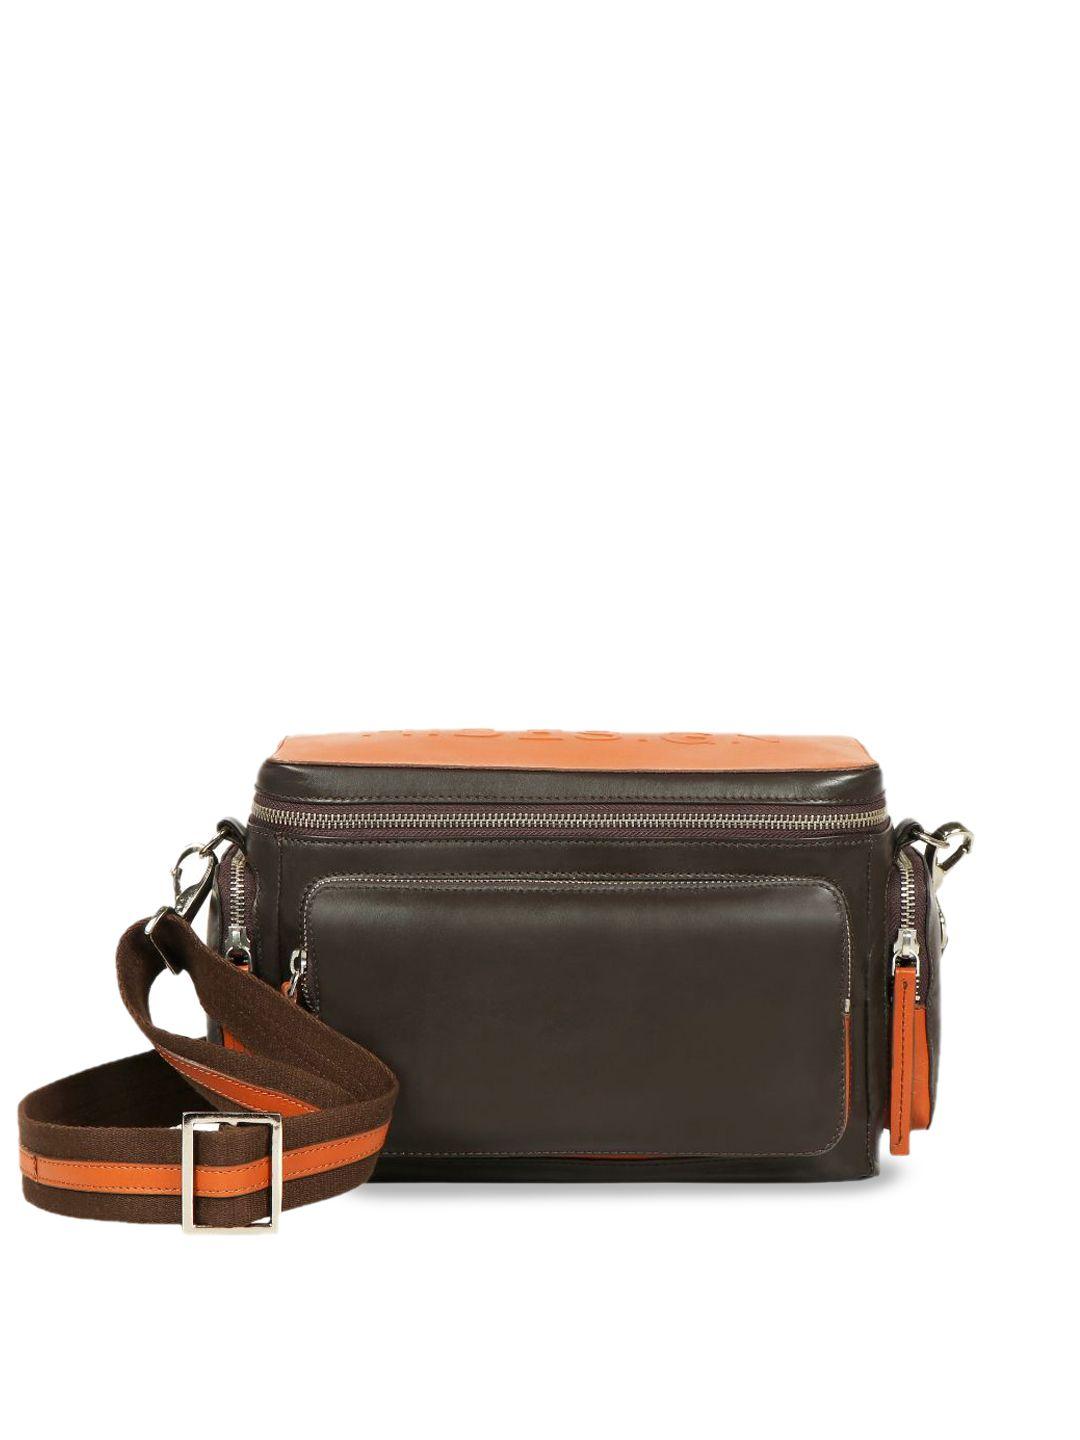 hidesign brown leather structured sling bag with cut work